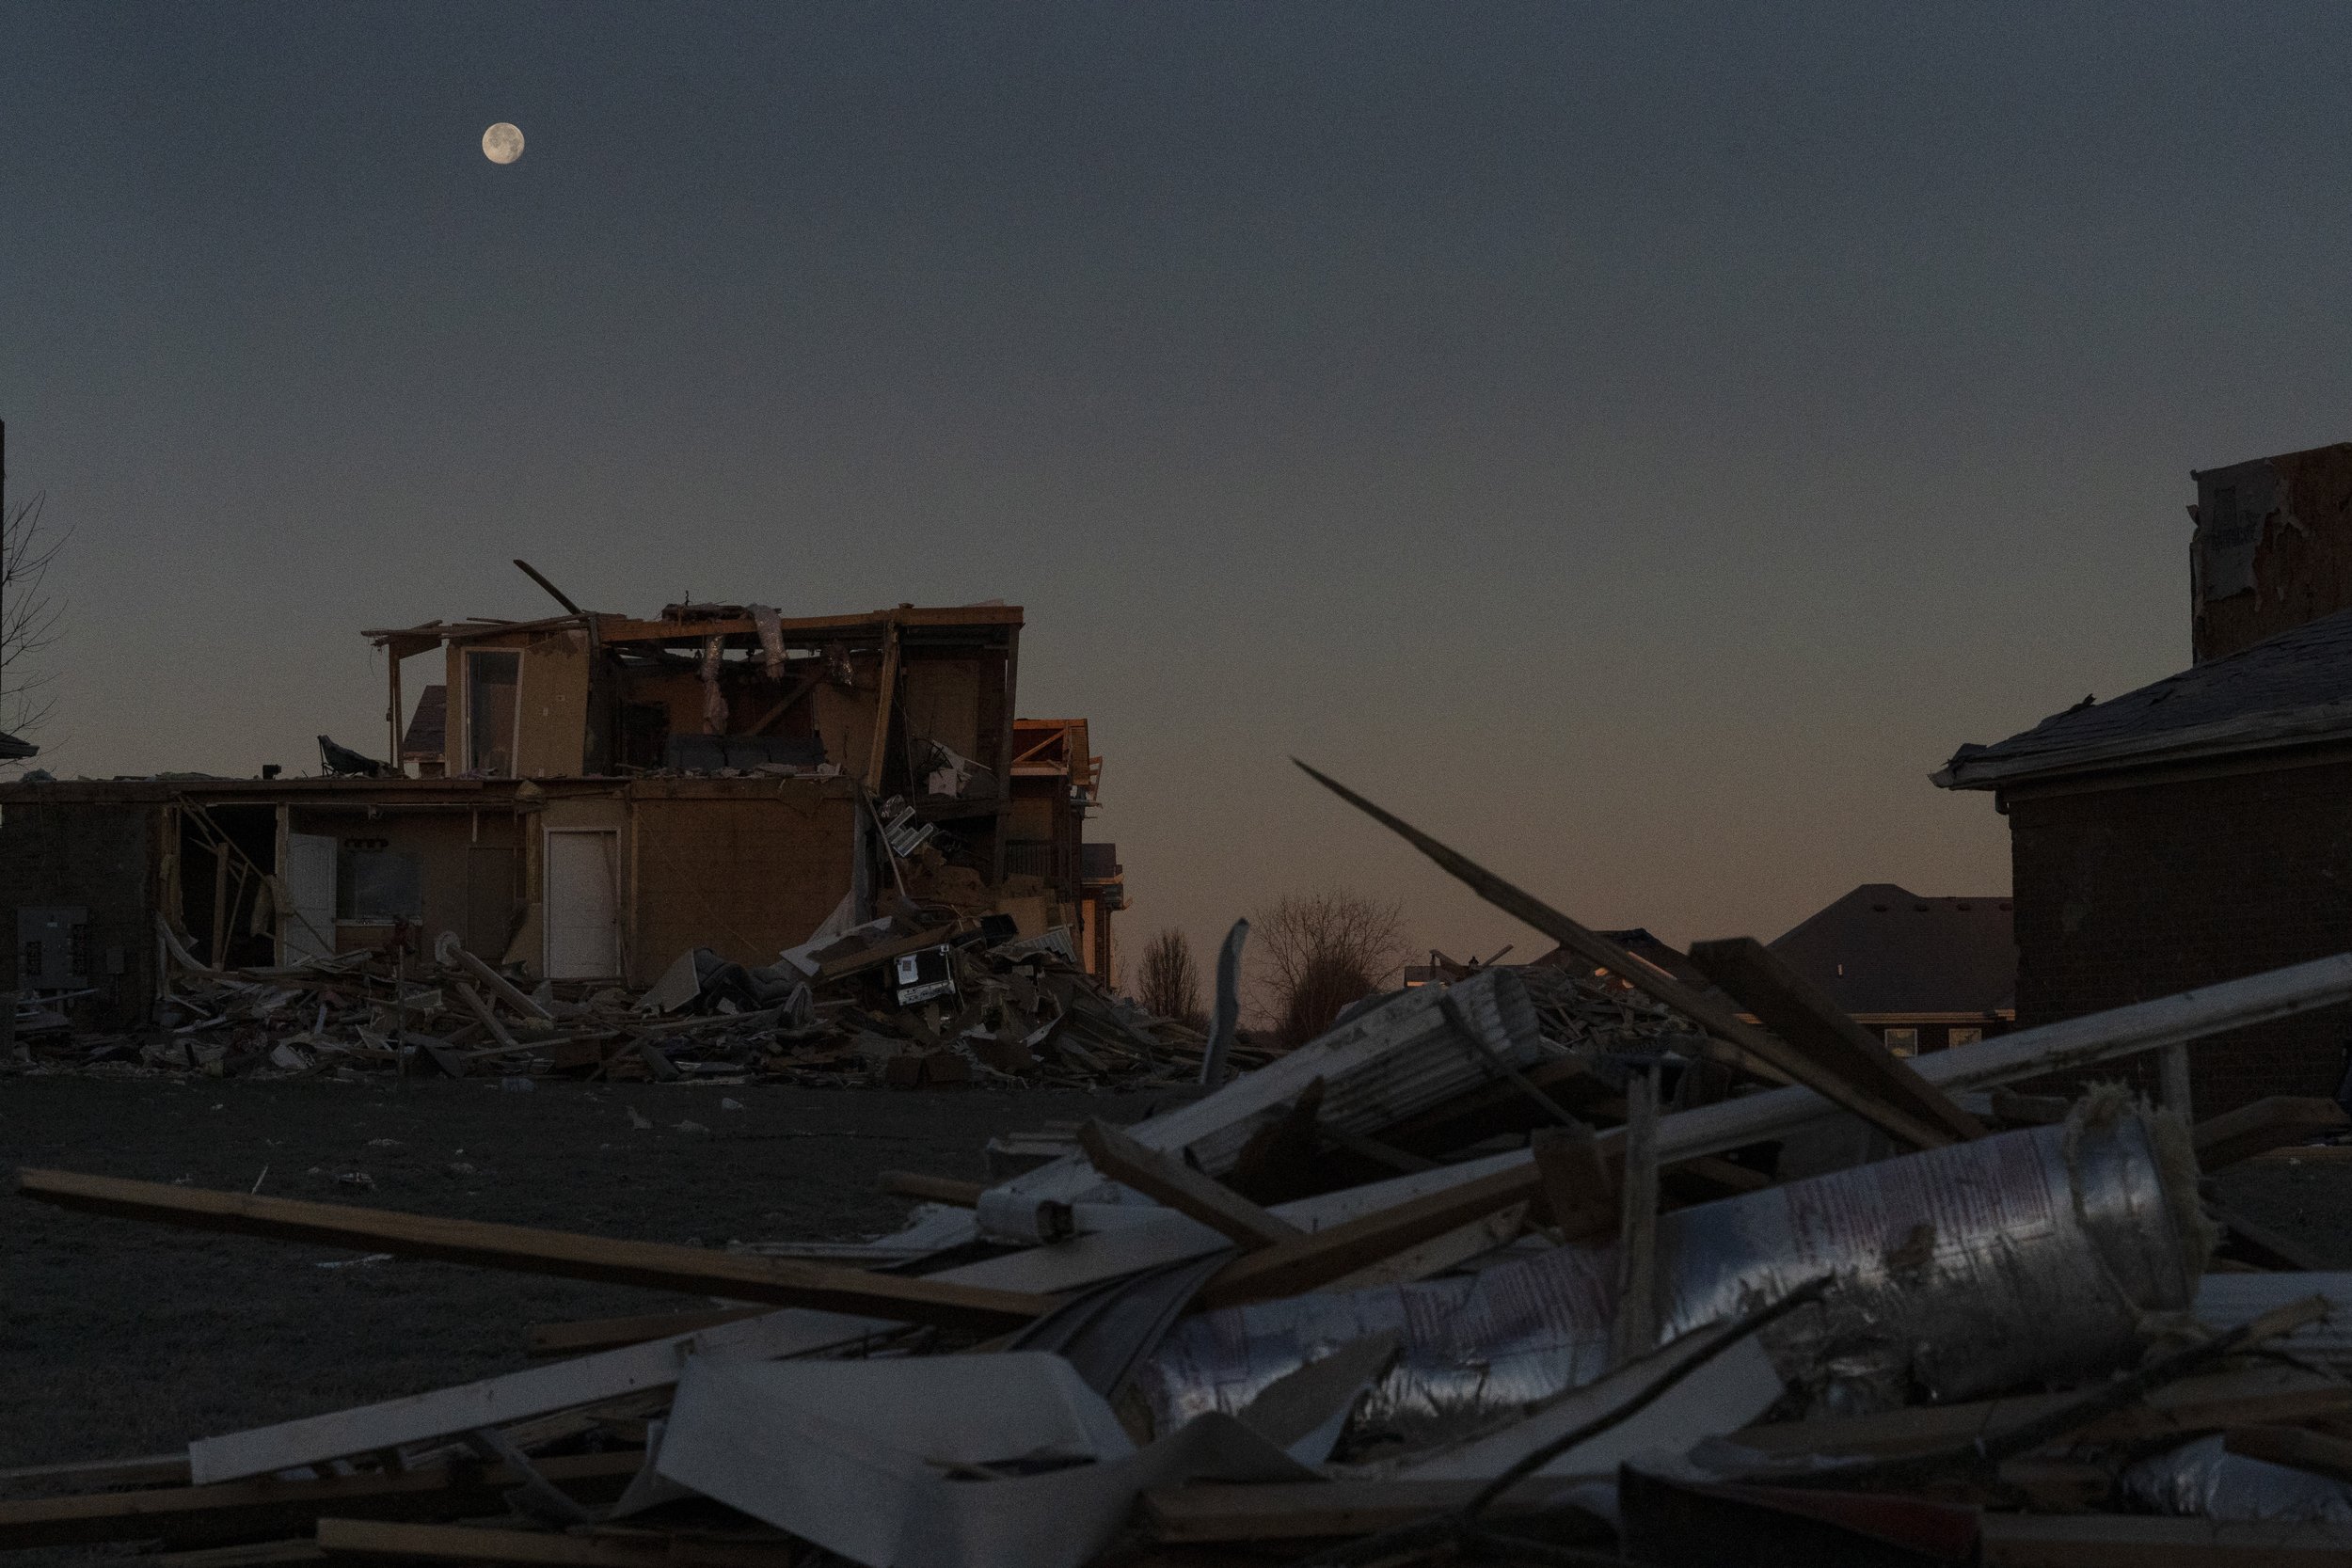  The moon sets as the first light of day reveals piles of debris and damaged homes in Bowling Green, Ky., Dec. 20, 2021. (AP Photo/Brynn Anderson) 